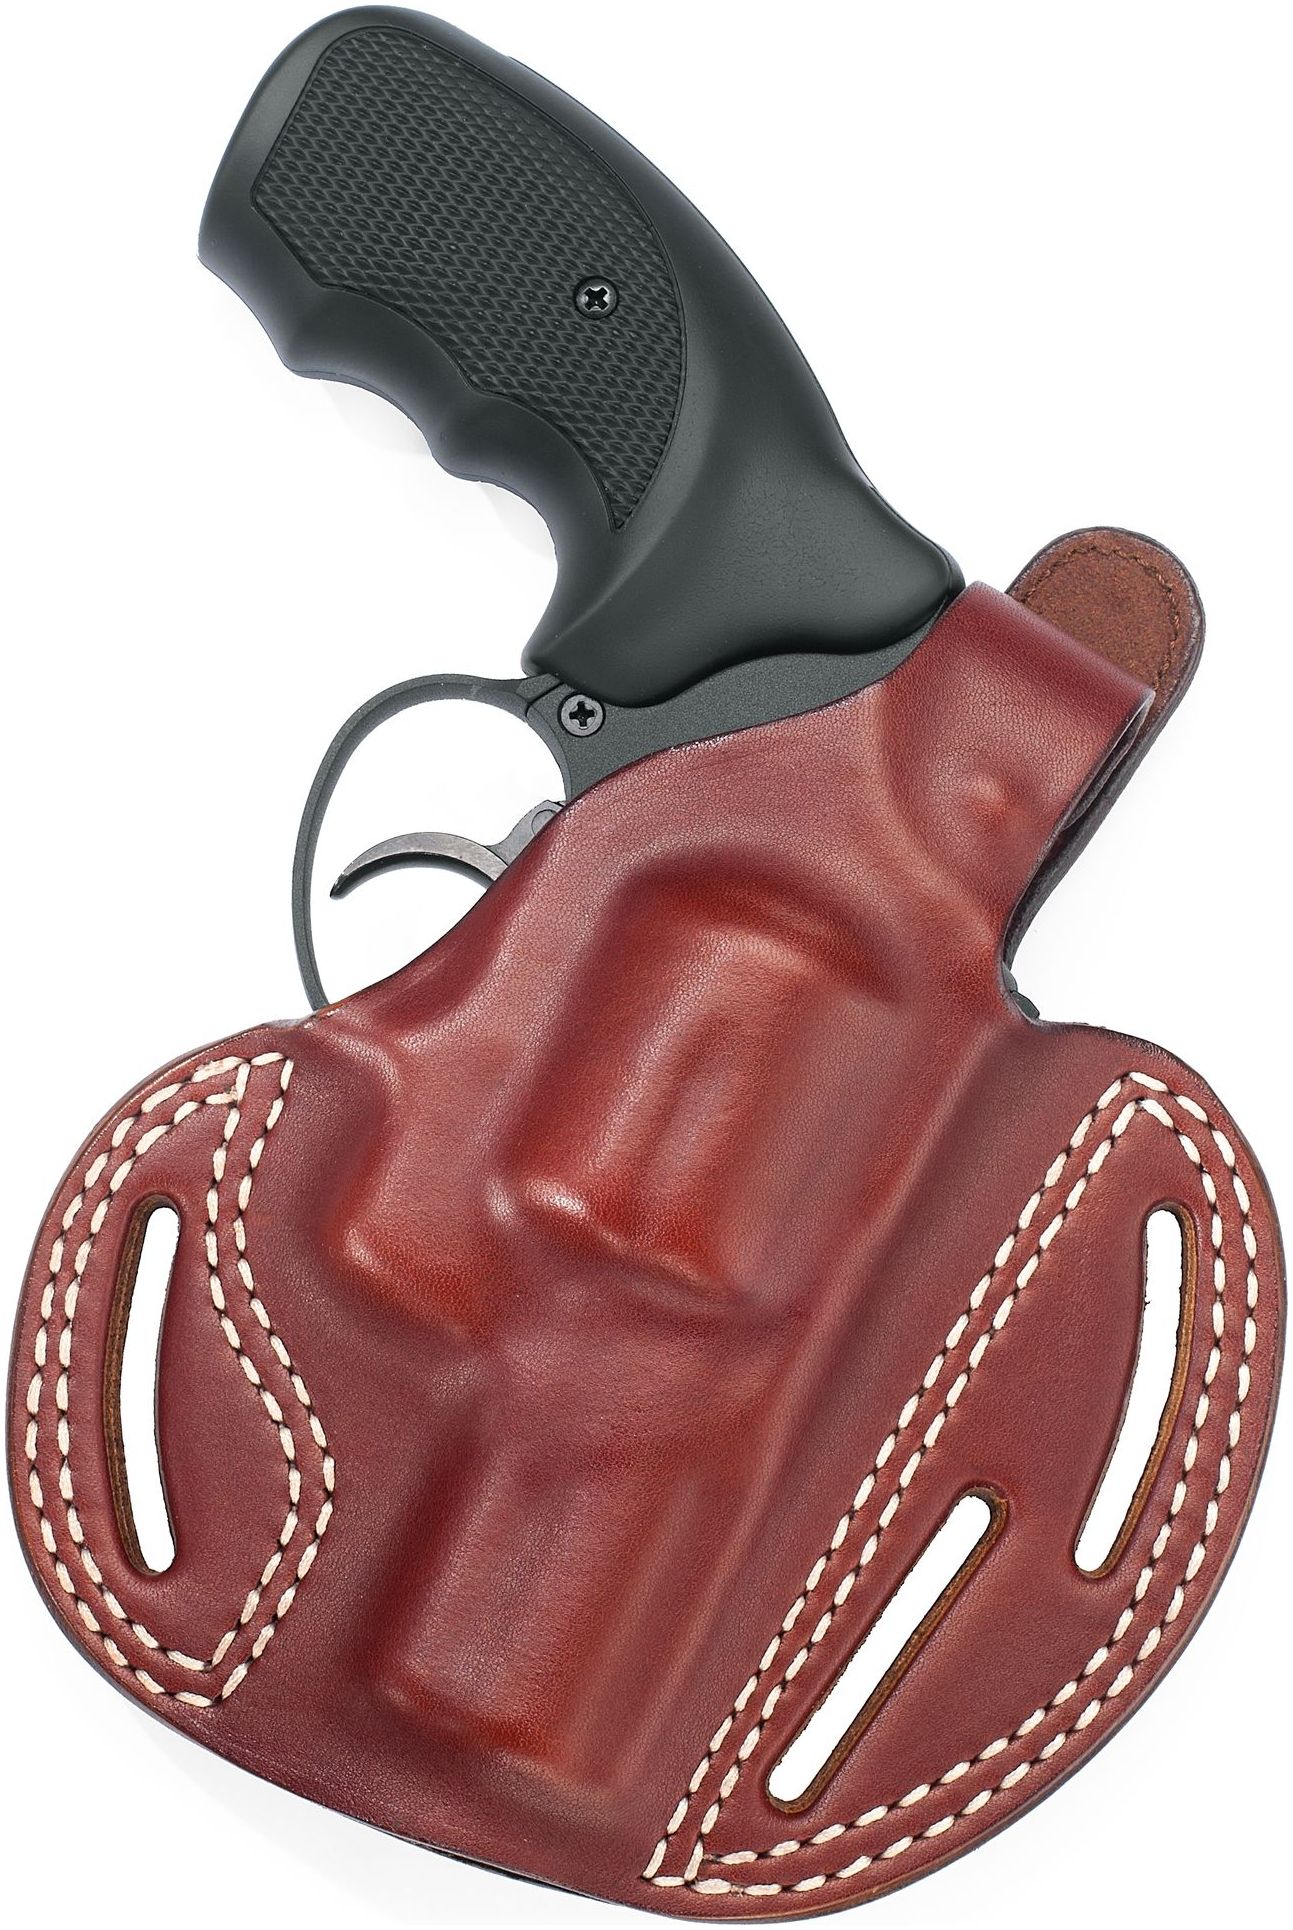 This Pancake OWB holster can be carried both OWB and cross-draw style. 